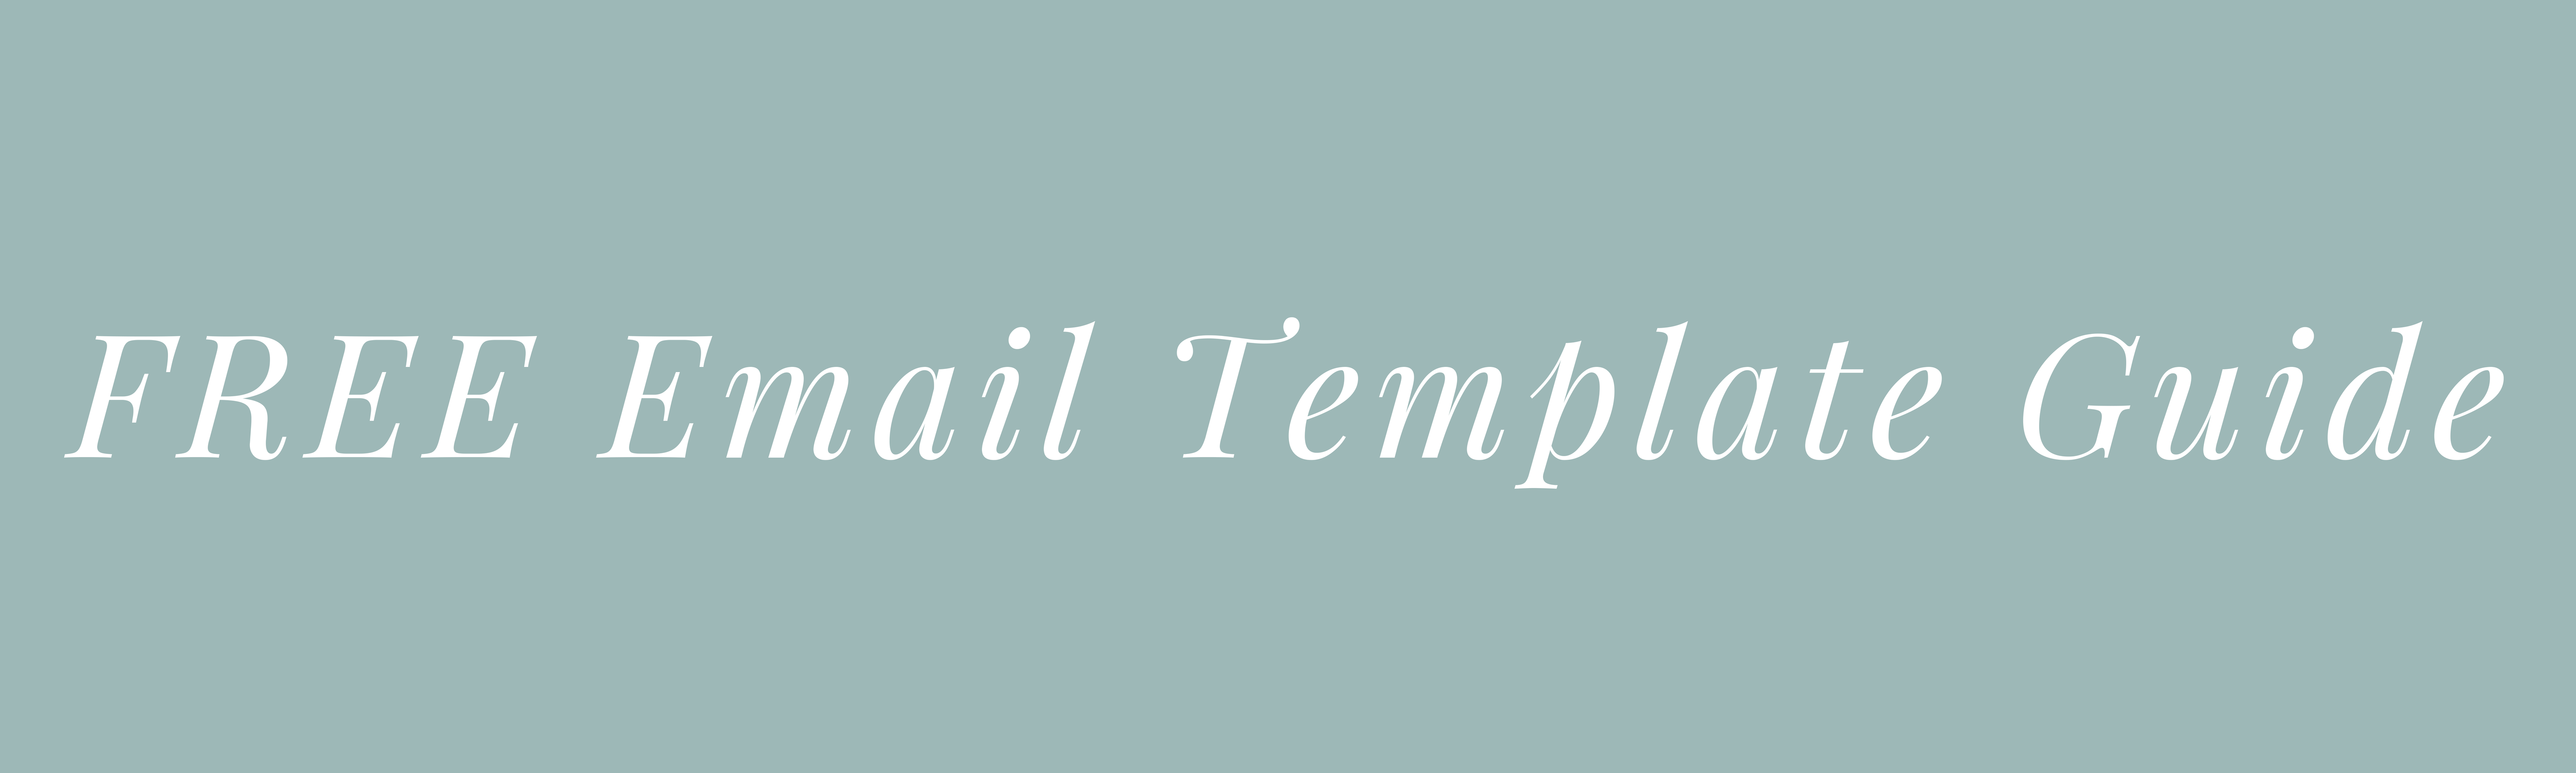 Free email template guide - Hannah Allen 